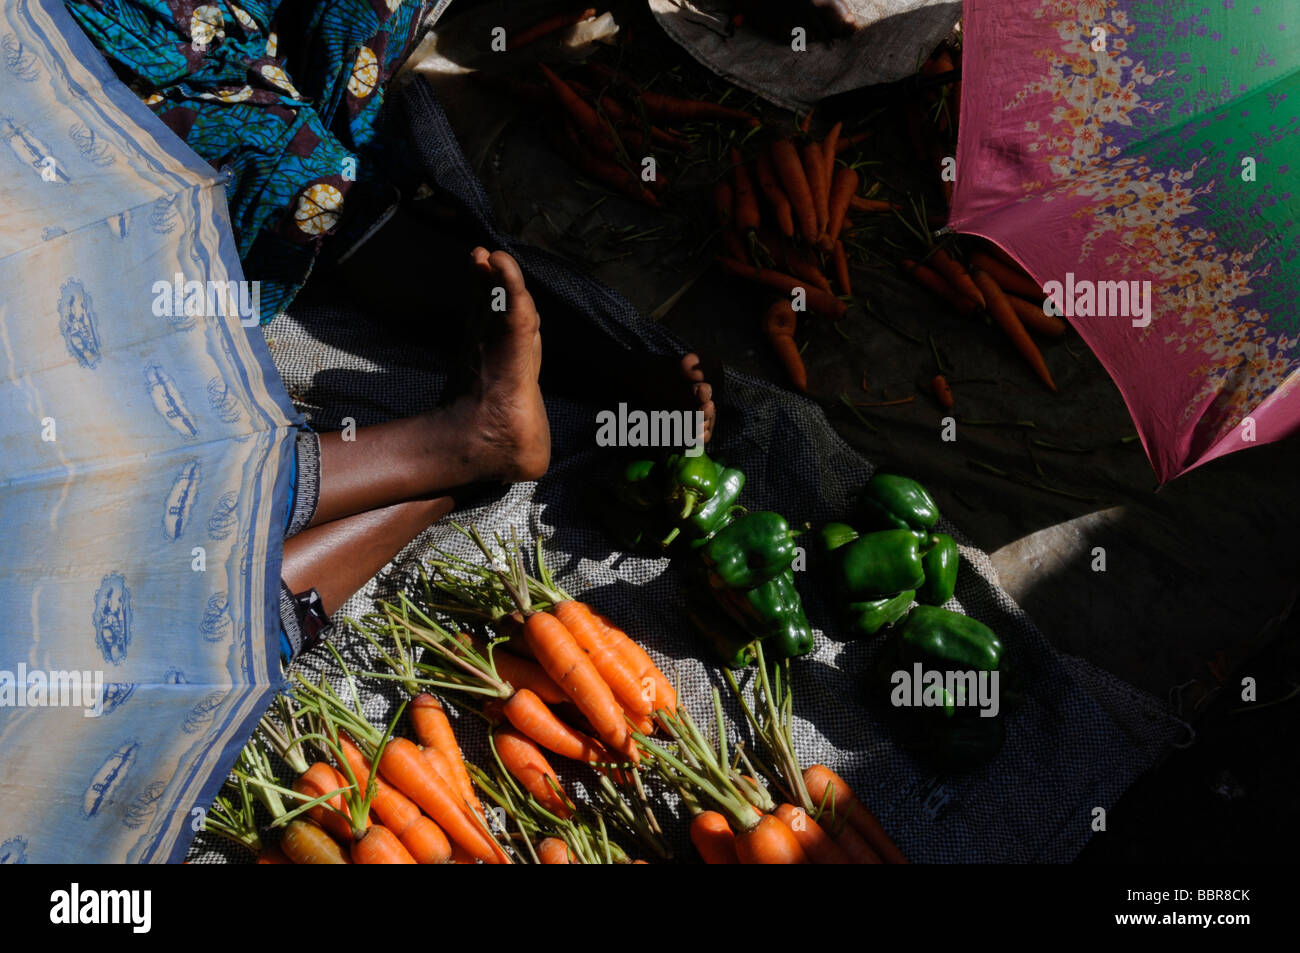 The vegetables market in Lilongwe capital of Malawi Africa Stock Photo